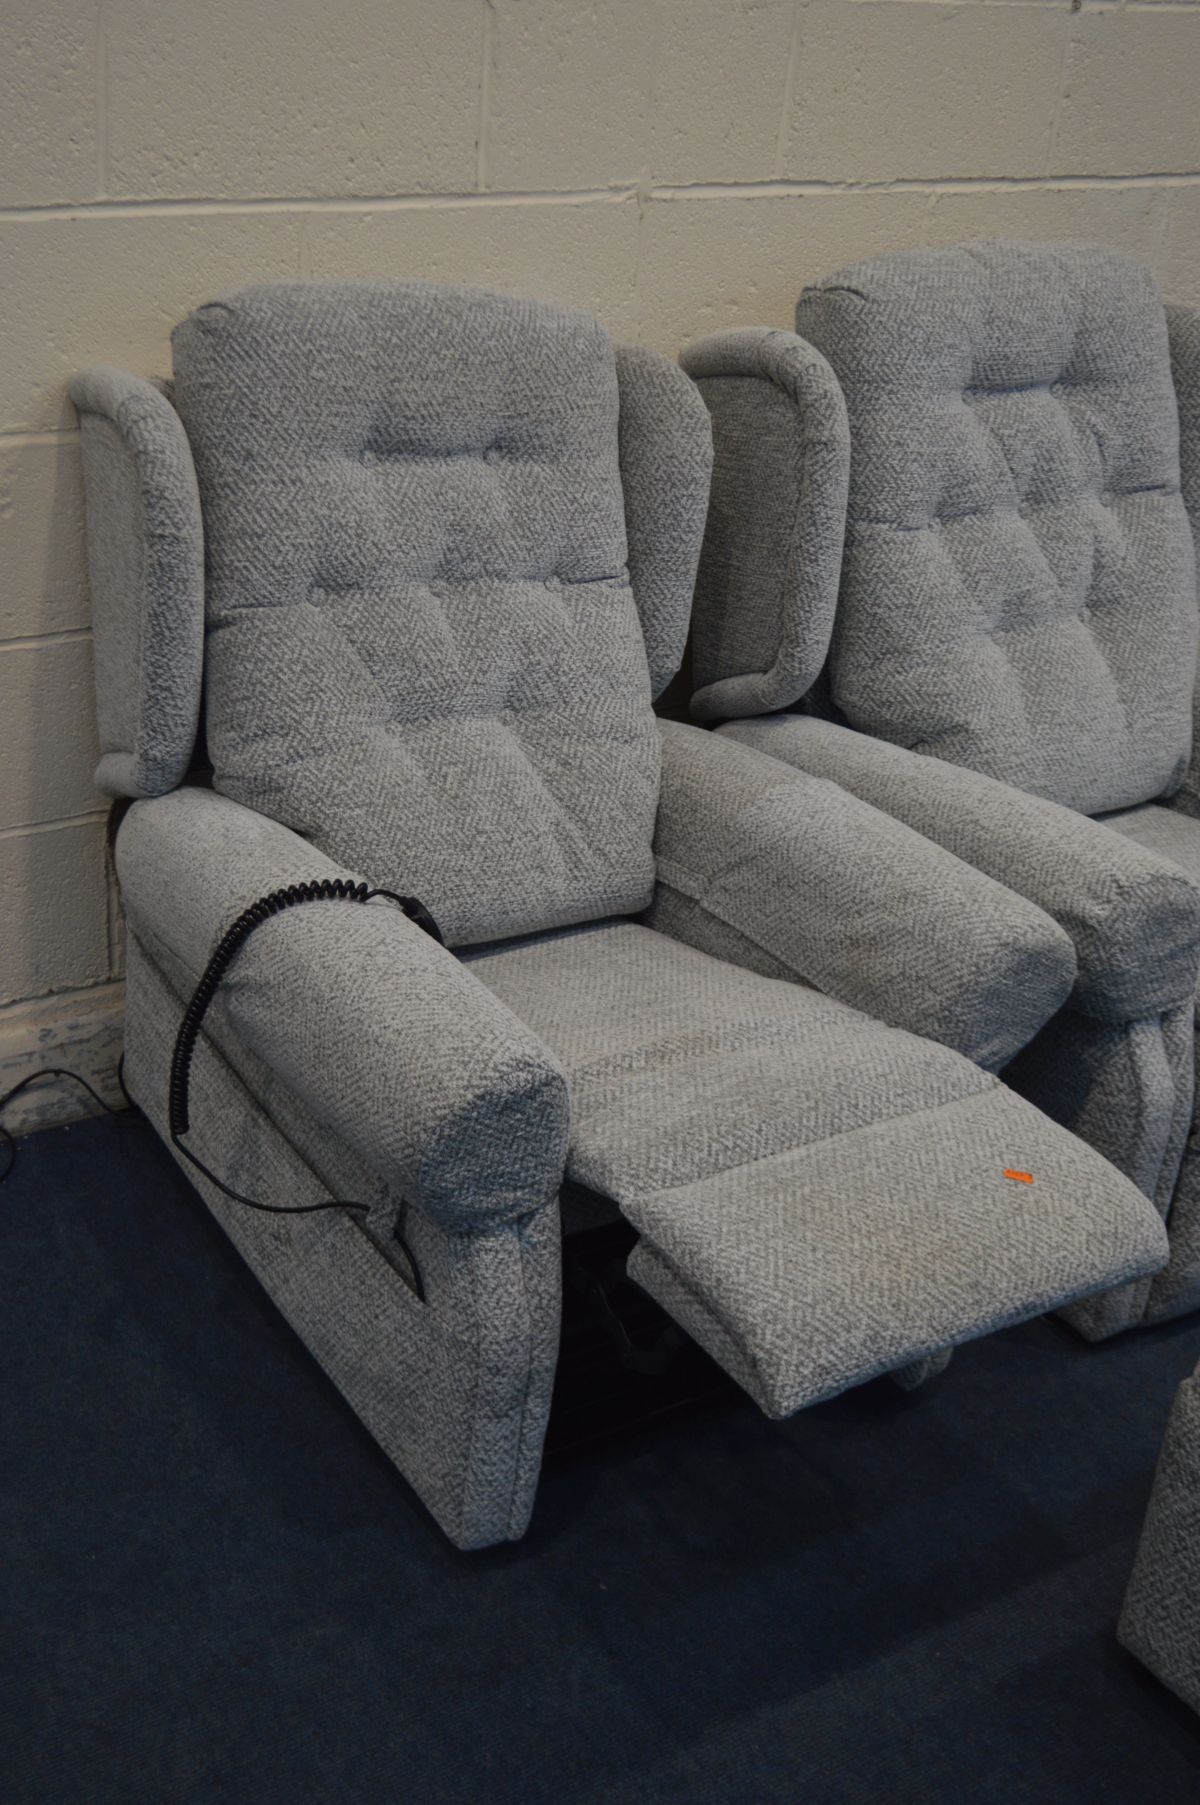 A PRIMACARE PATTERNED GREY UPHOLSTERED ELECTRIC RISE AND RECLINE ARMCHAIR (PAT pass and working) a - Image 3 of 3